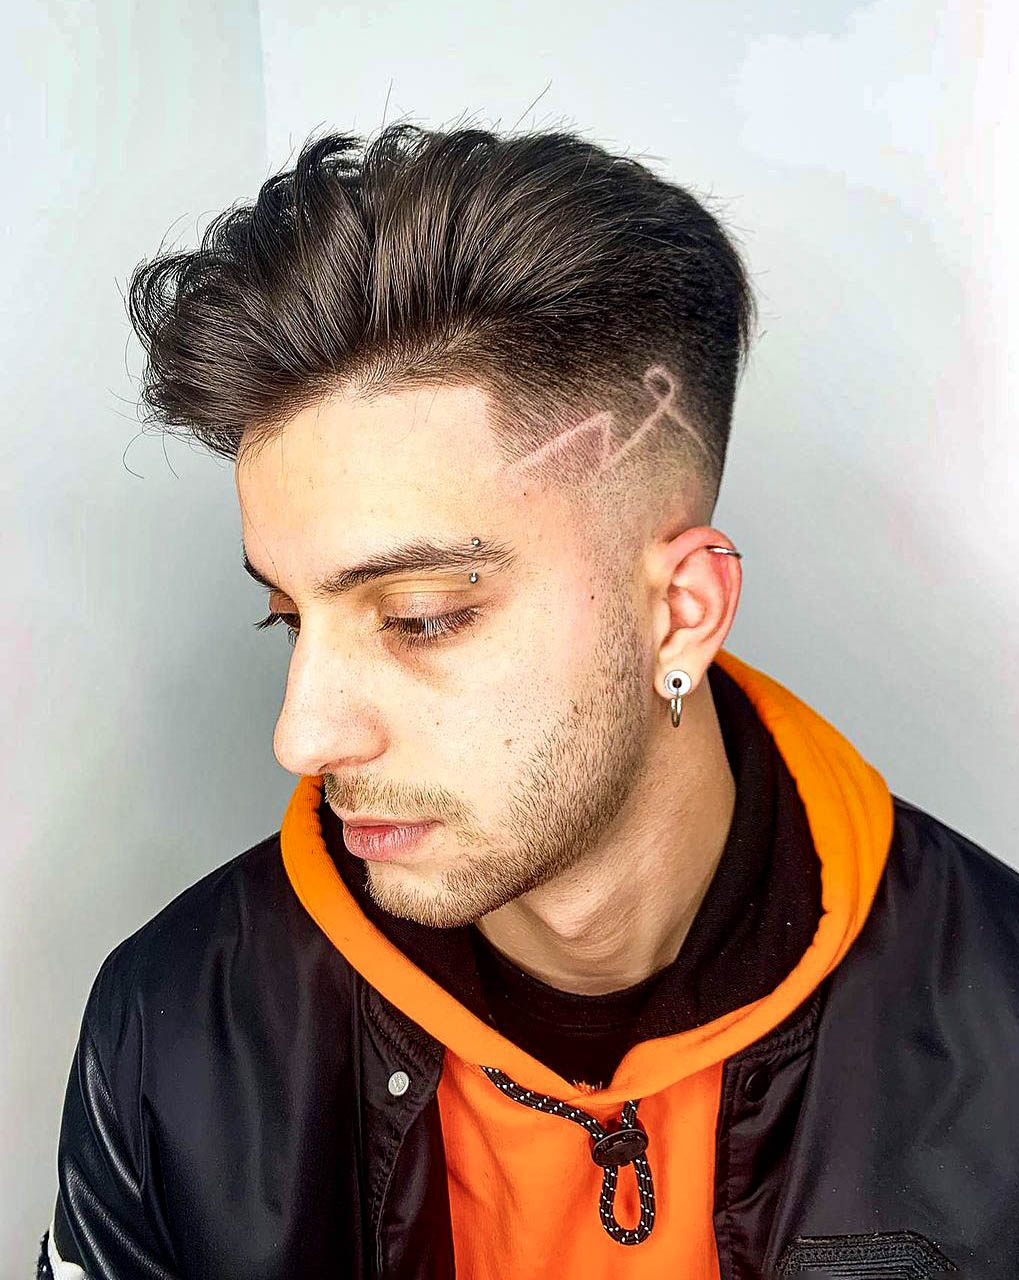 Men's box cut - photos of works by hair stylists at theYou.com.